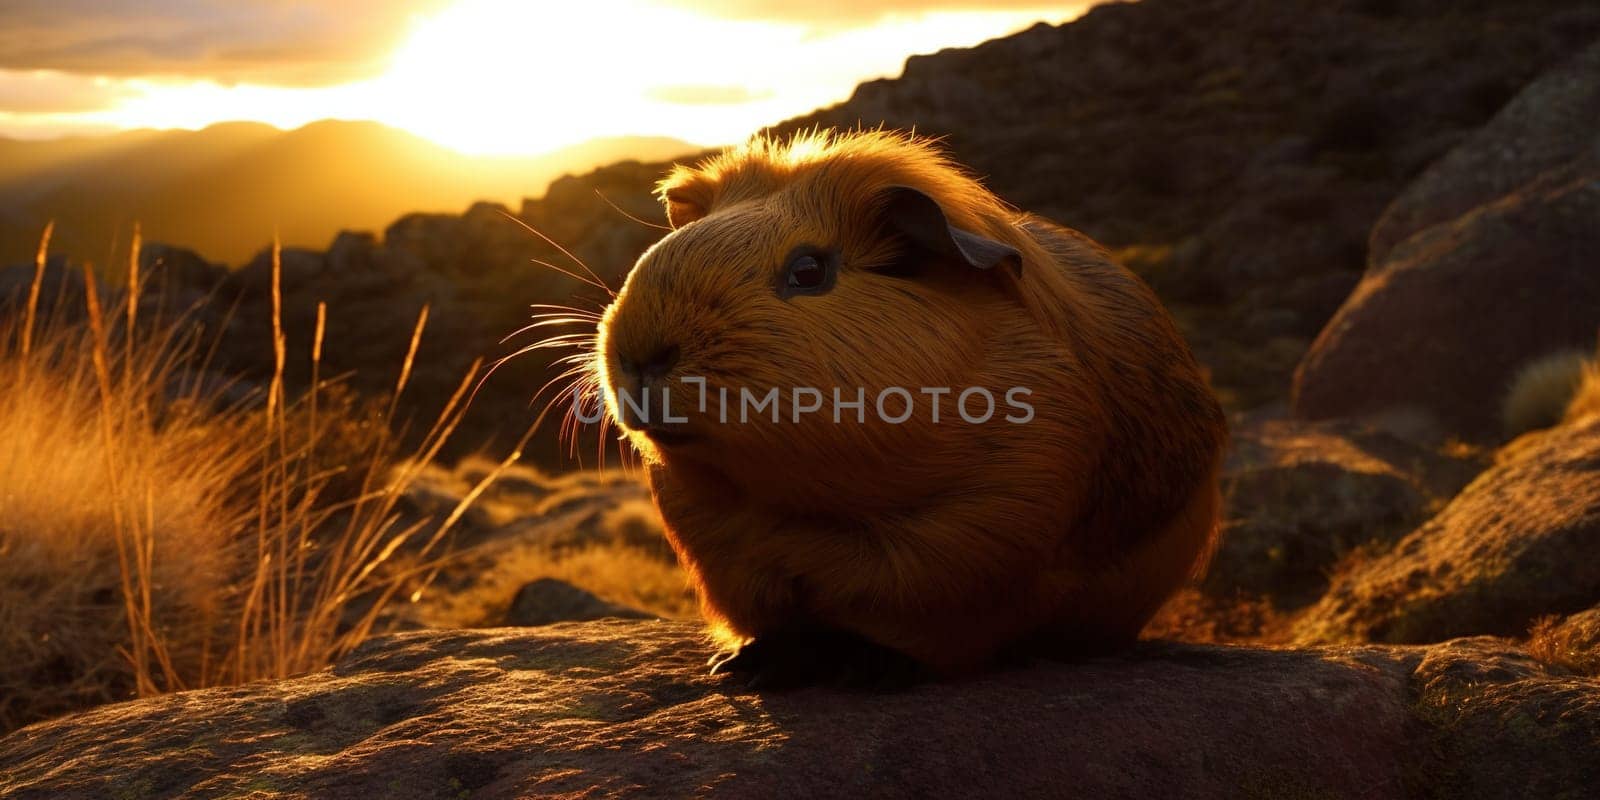 Cute Guinea Pig On A Ground At Sunset, Close Up At Sunset